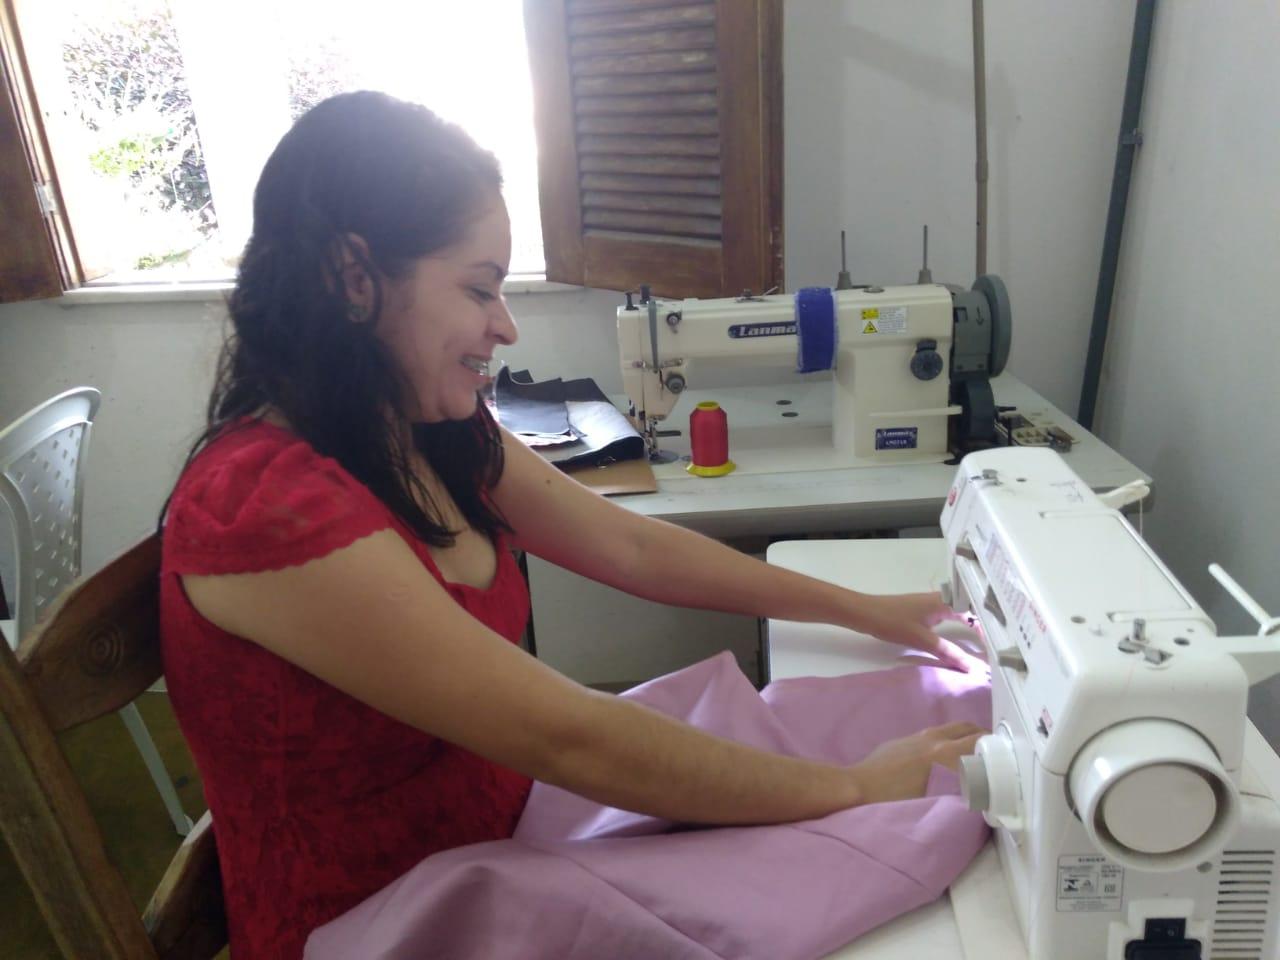 4 new students in the sewing course at  Projeto Textil, Brasilien - Child & Family Foundation 